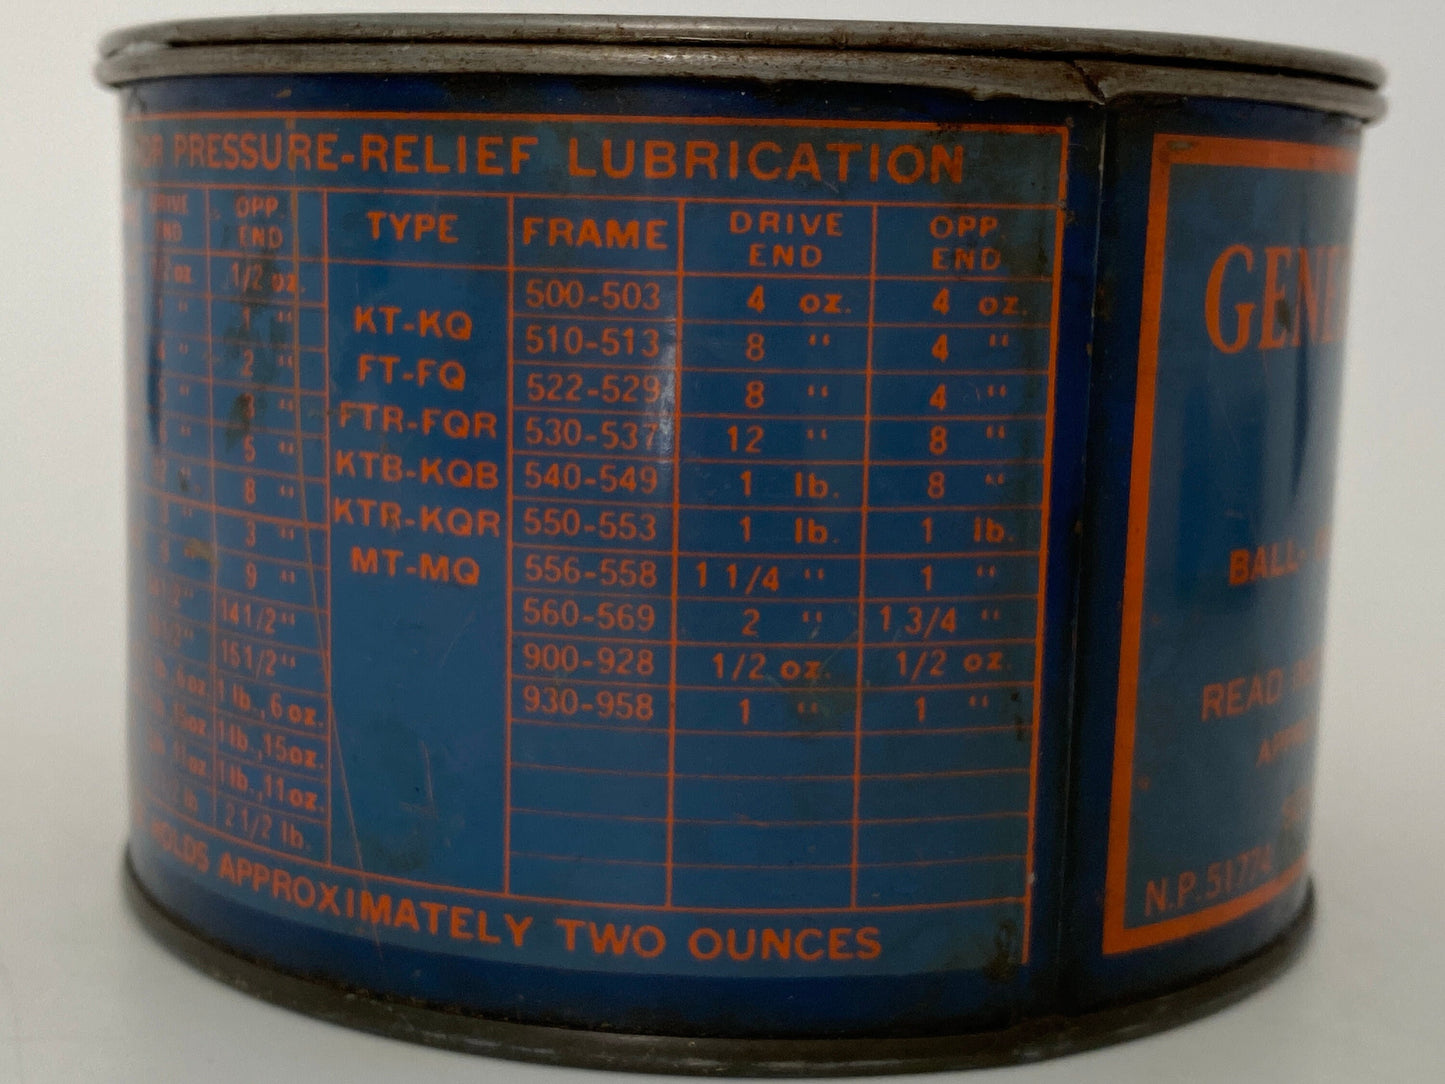 Midcentury General Electric Grease Tin Can